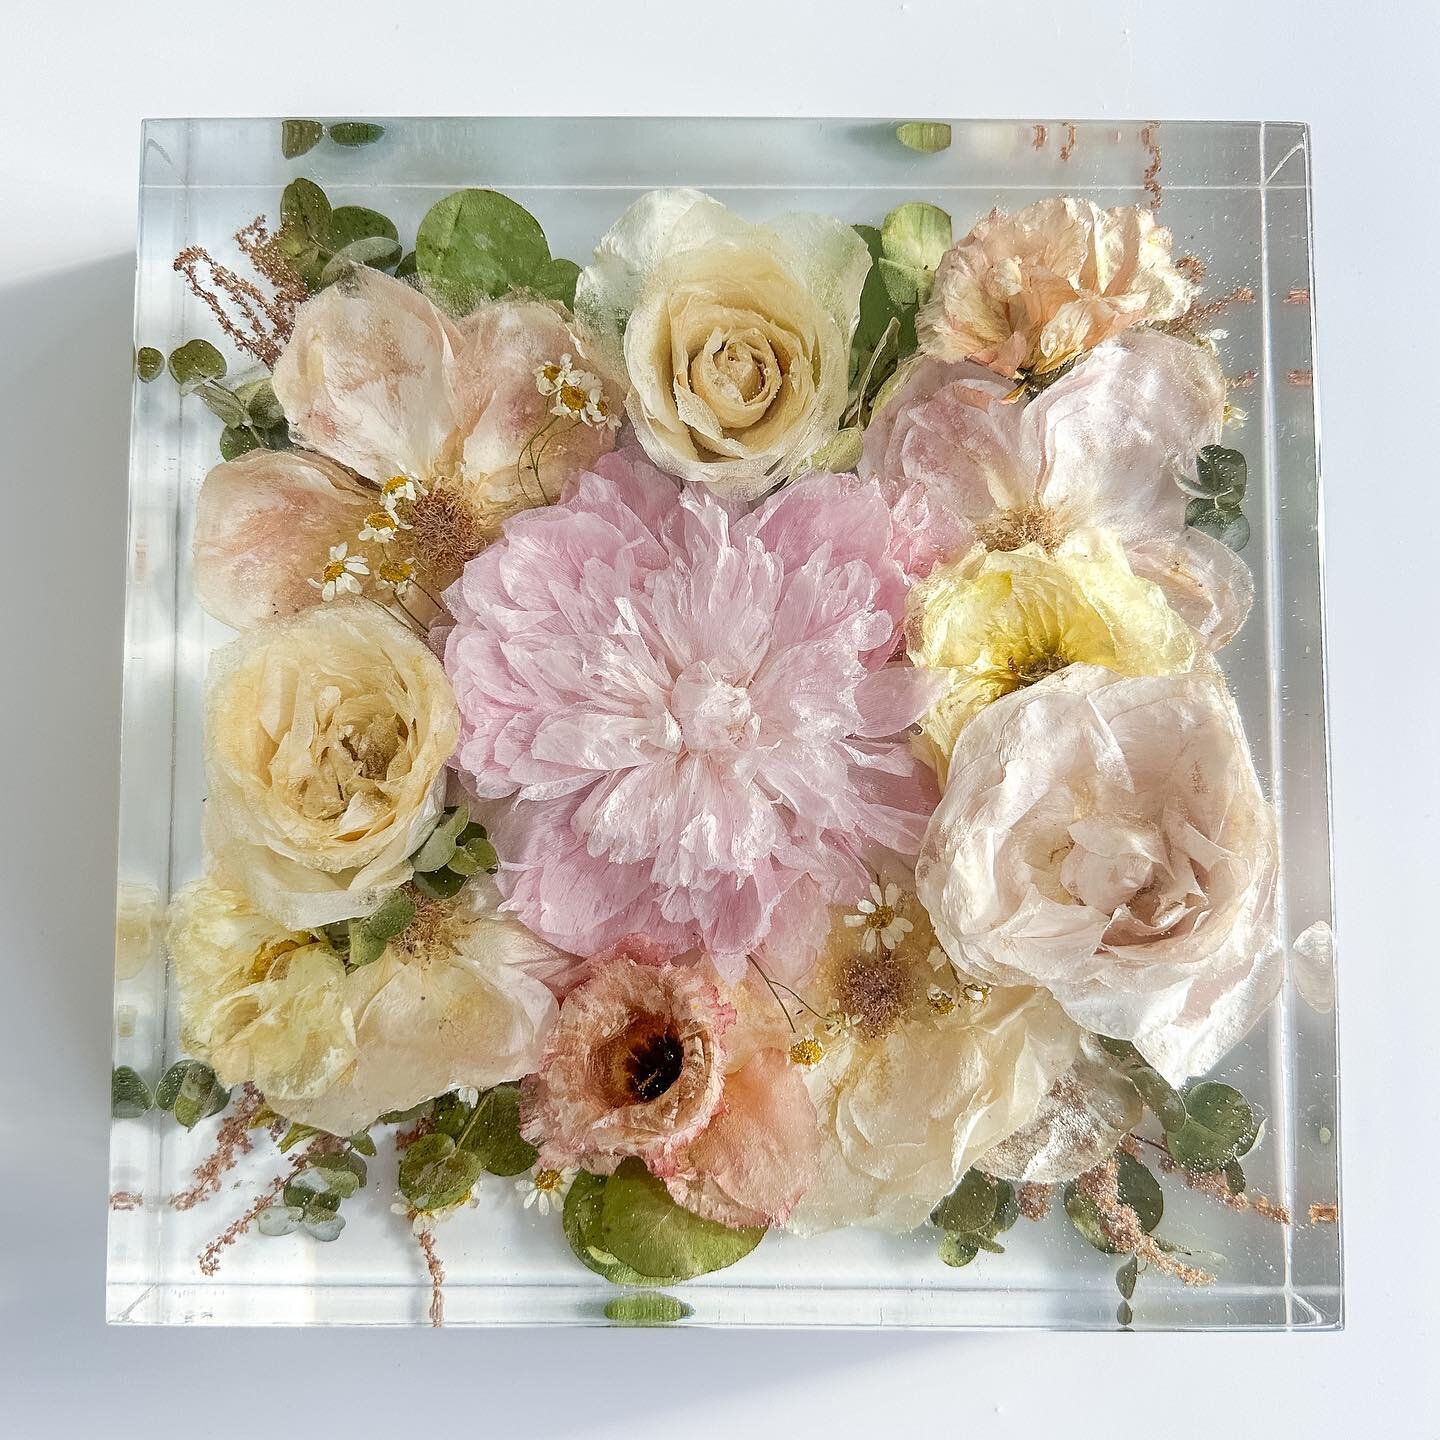 🤍💗 For Emily 💗🤍

This is our 25cm square block. I recommend this size as a minimum if you&rsquo;d like to preserve as much of your main bouquet flowers as possible. 

#resin #resinart #bouquet #bouquetpreservation #weddingkeepsake #northeastbride